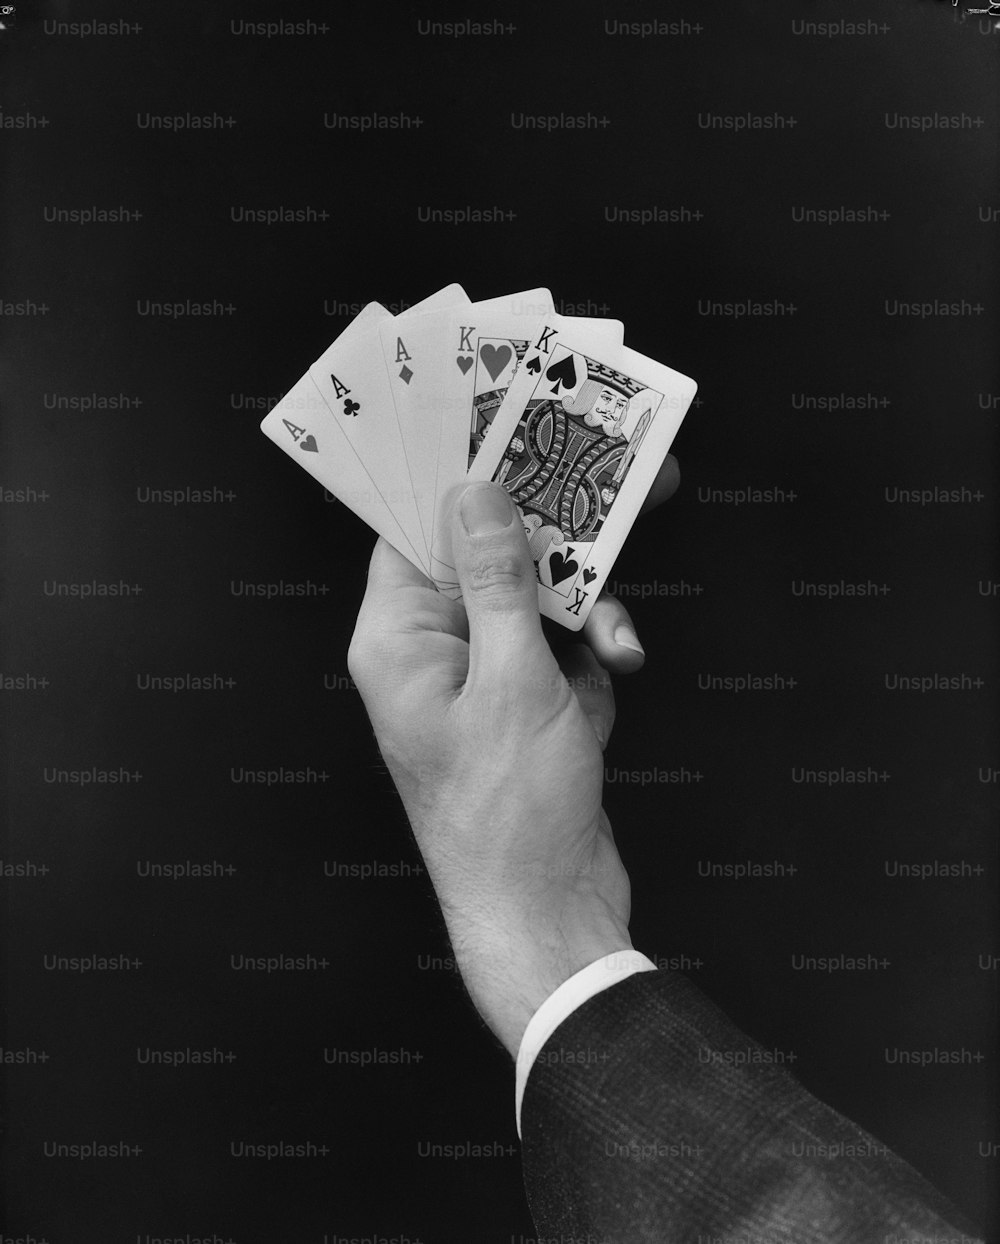 UNITED STATES - CIRCA 1950s:  Man's hand holding 'full house' poker card hand.